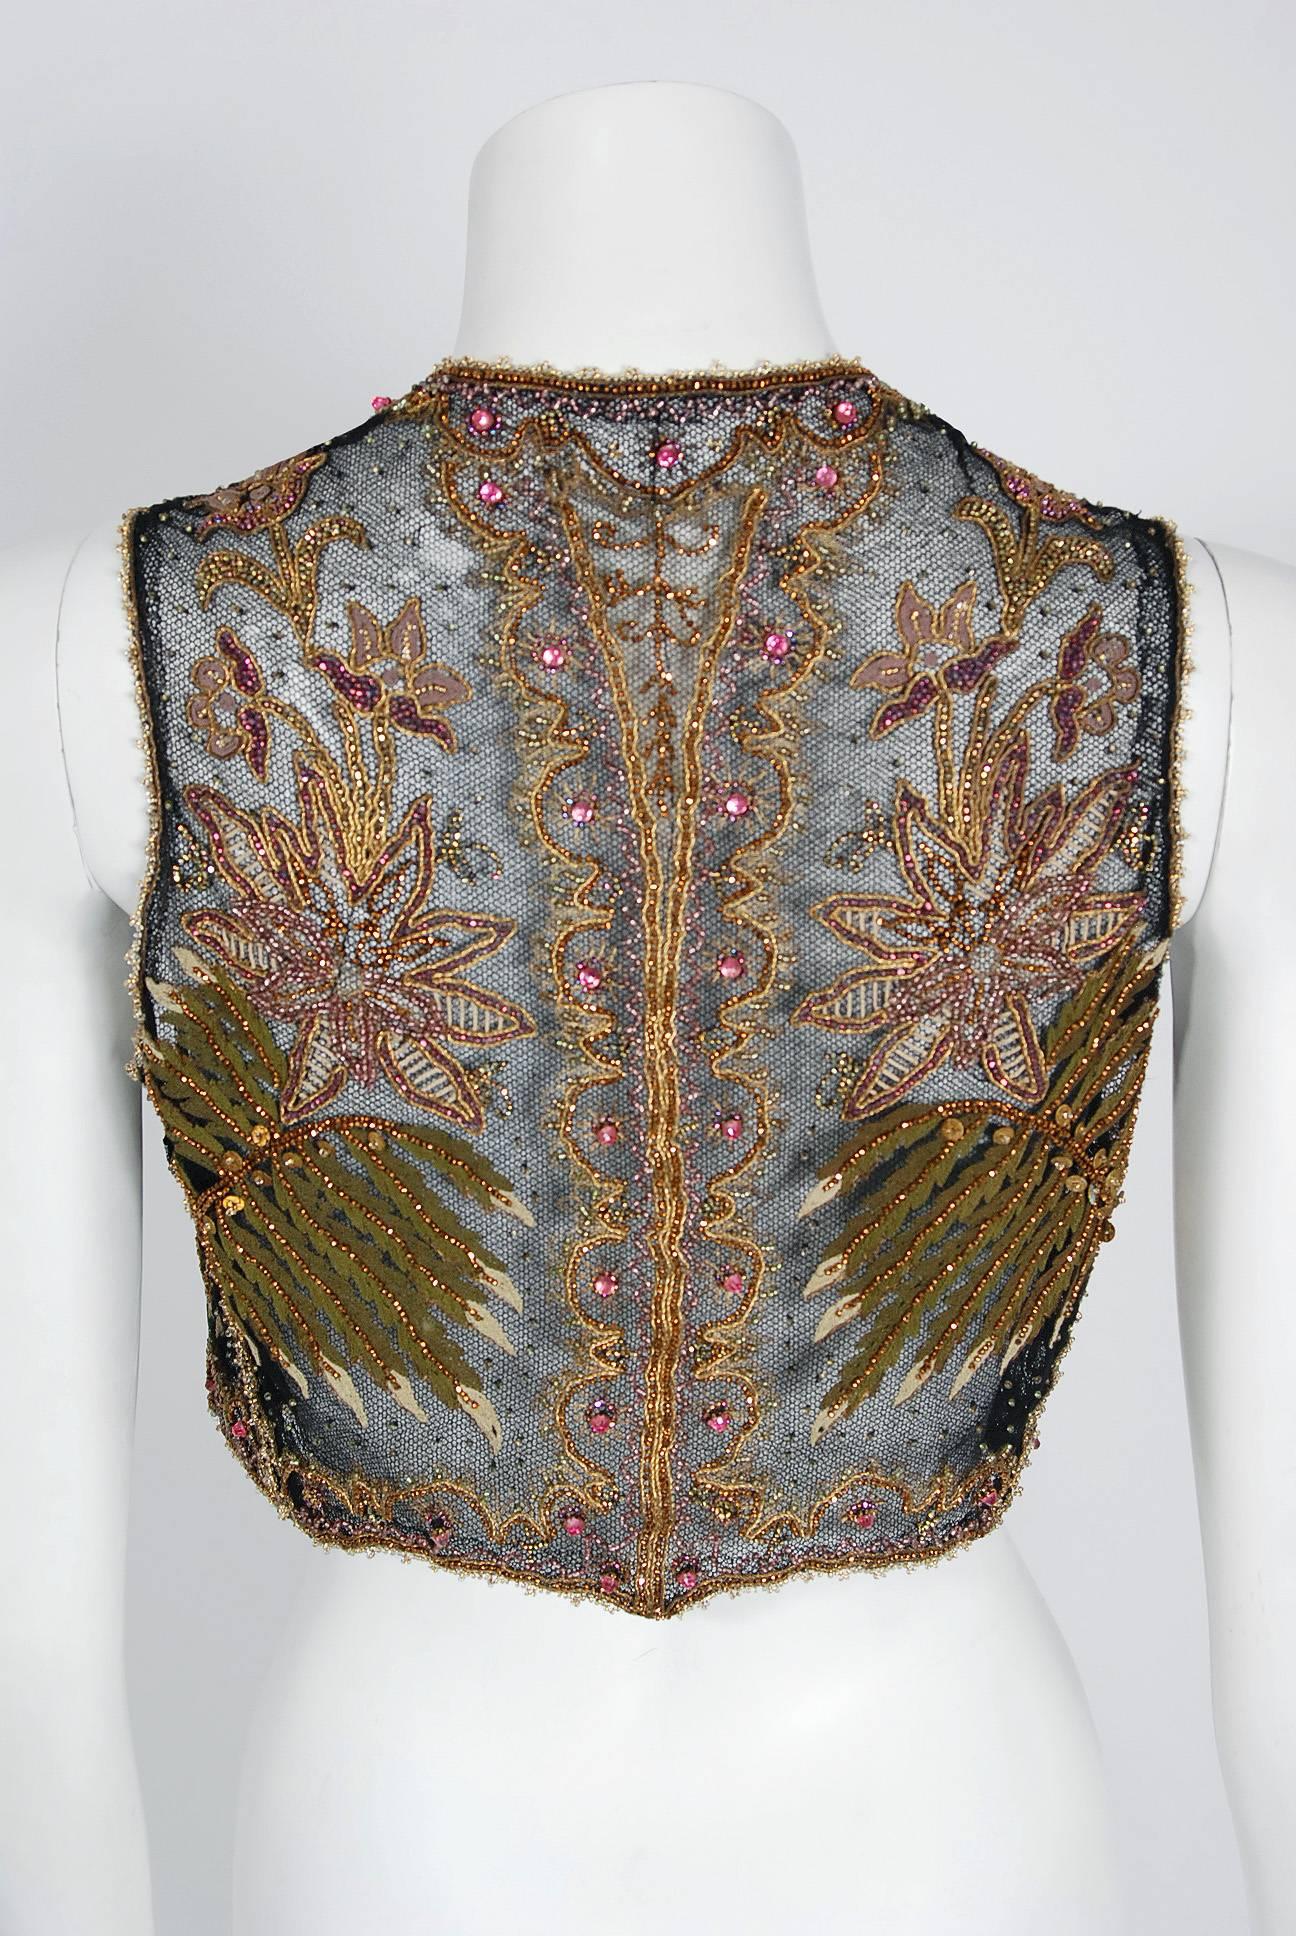 Vintage 1910s Edwardian Couture Embroidered Beaded Sheer Net Art-Nouveau Vest In Good Condition For Sale In Beverly Hills, CA